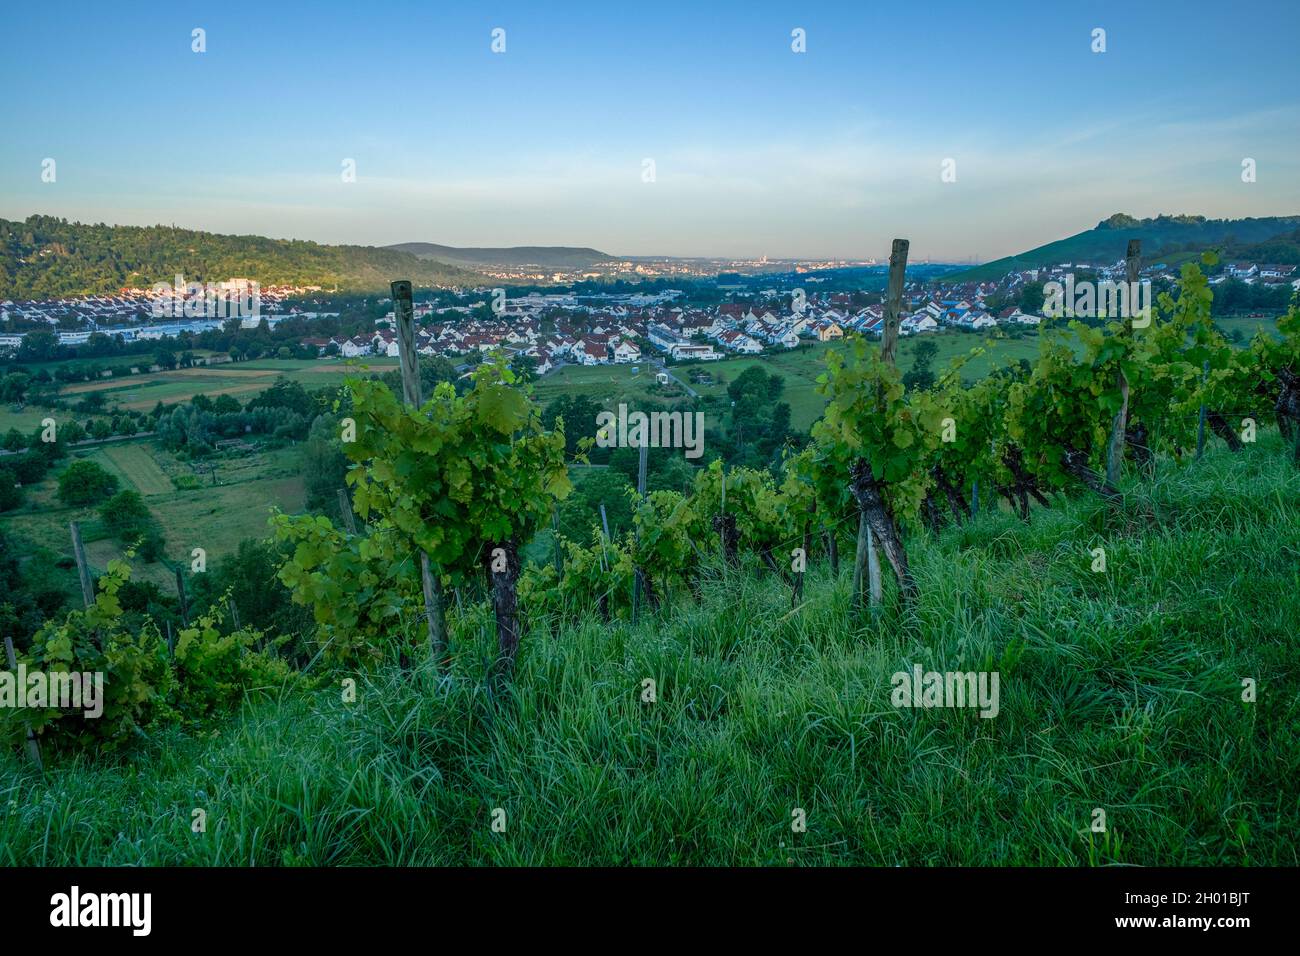 A close up shot of a German vineyard landscape in the Remstal valley dawn scene Stock Photo